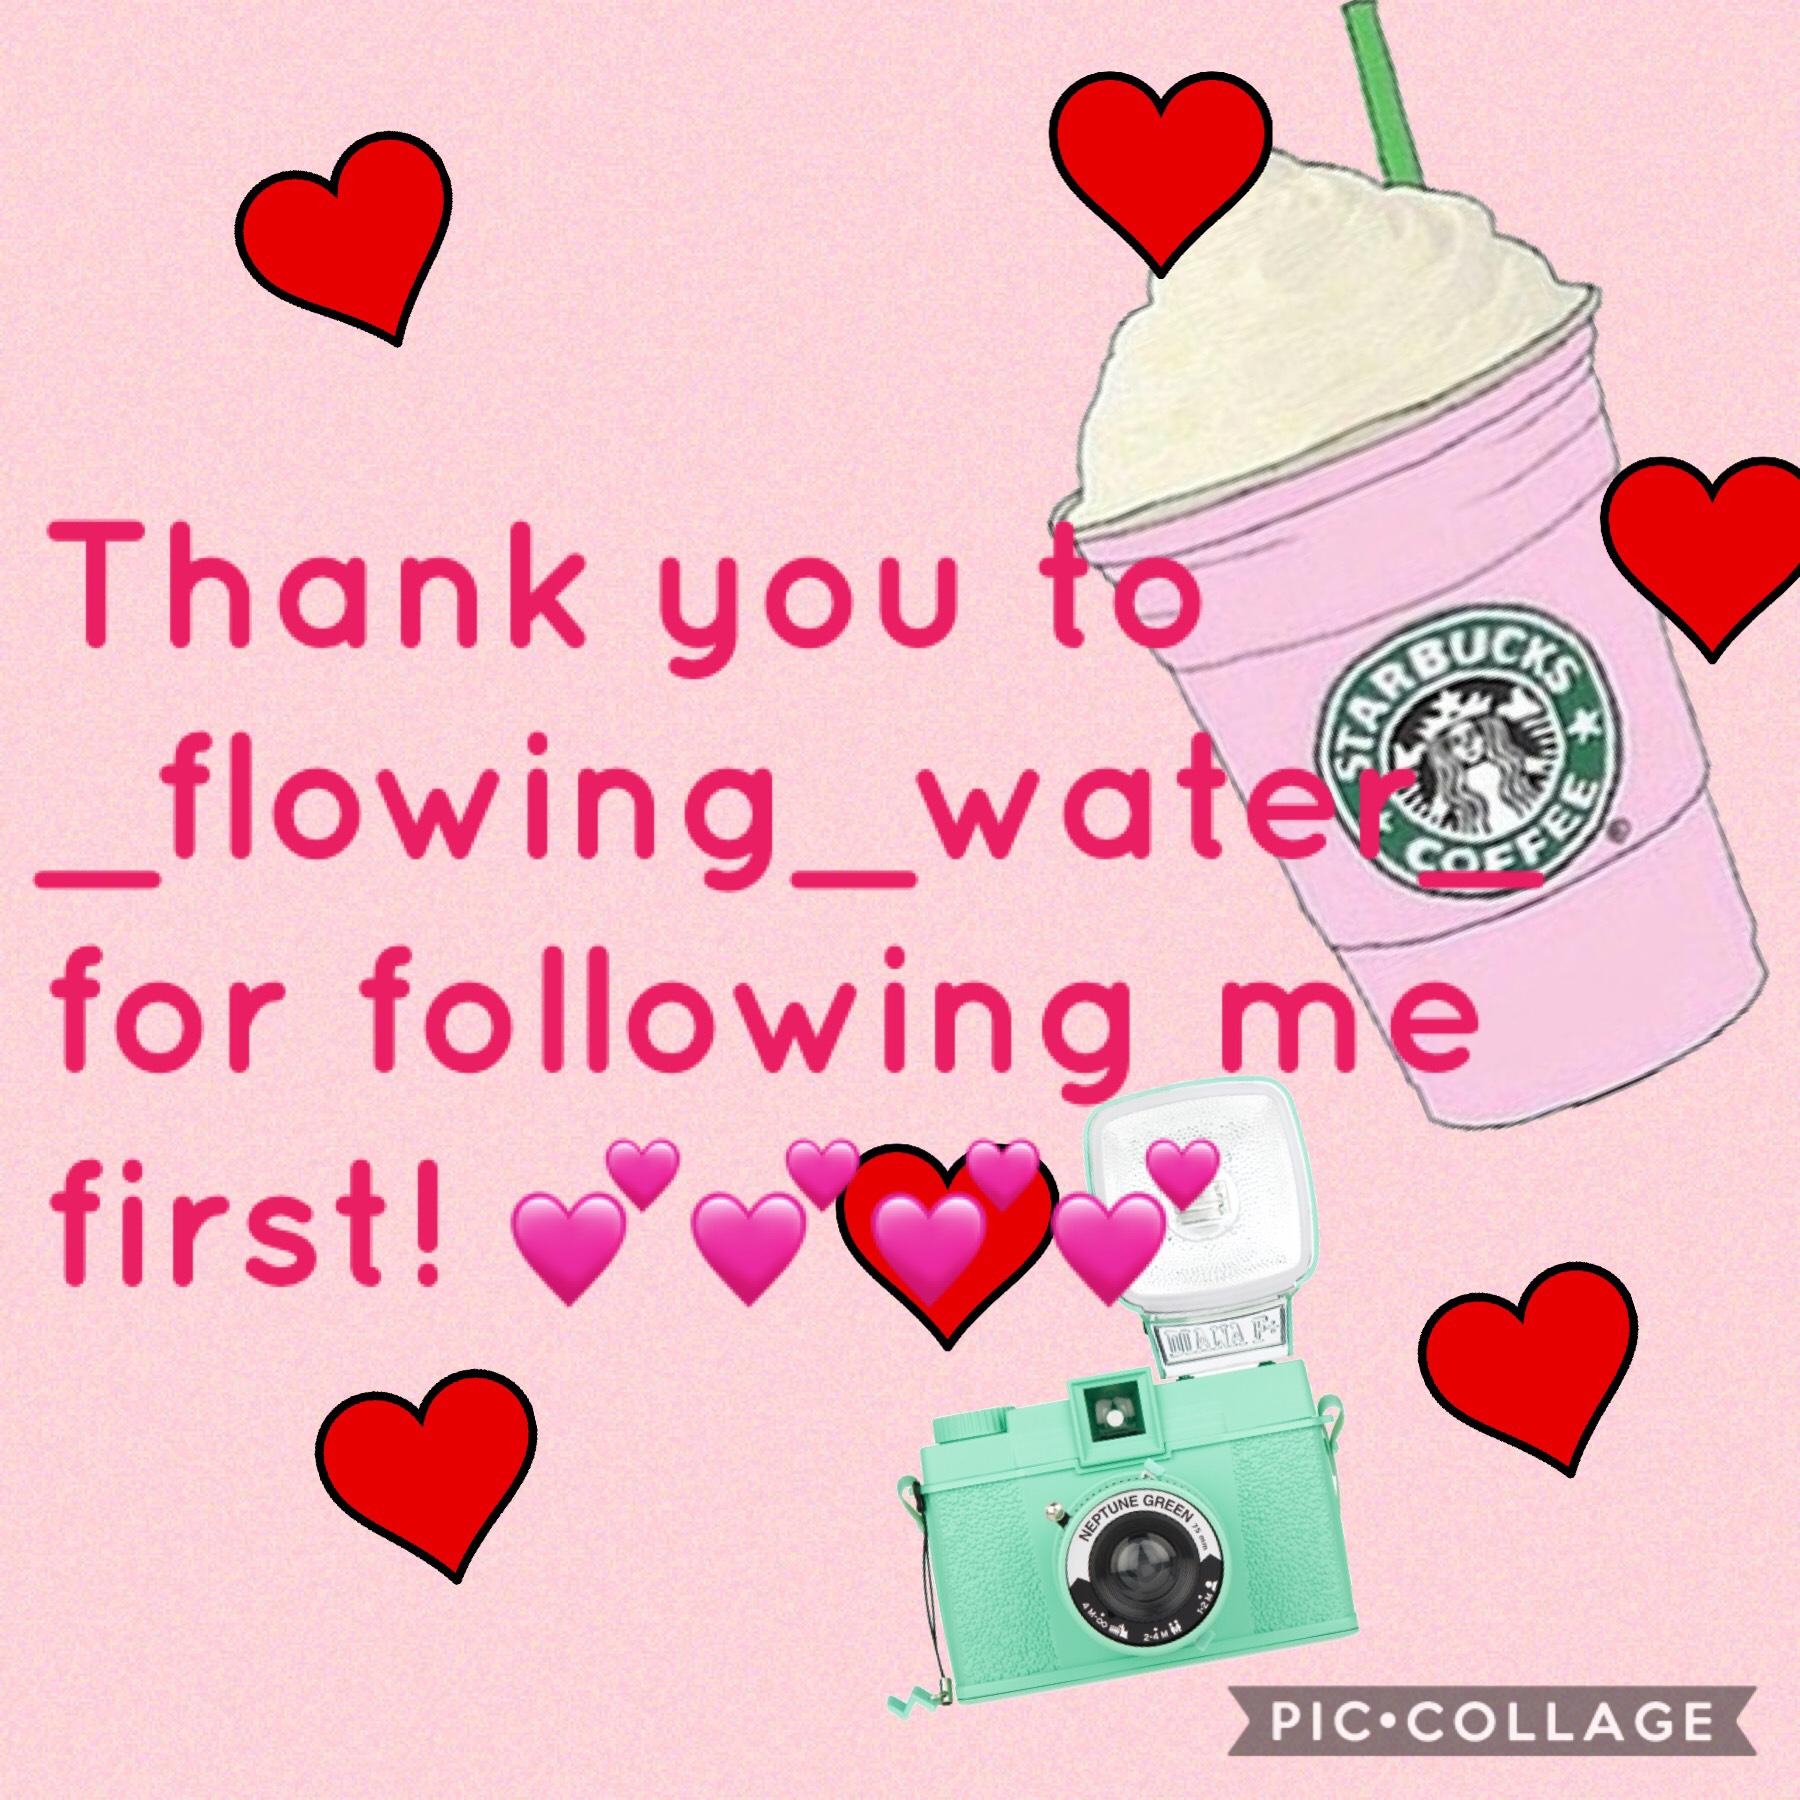 Please comment her and like her posts! #flowing #water #thankyou #follow #comment #like #starbucks #love heart #camera #pink